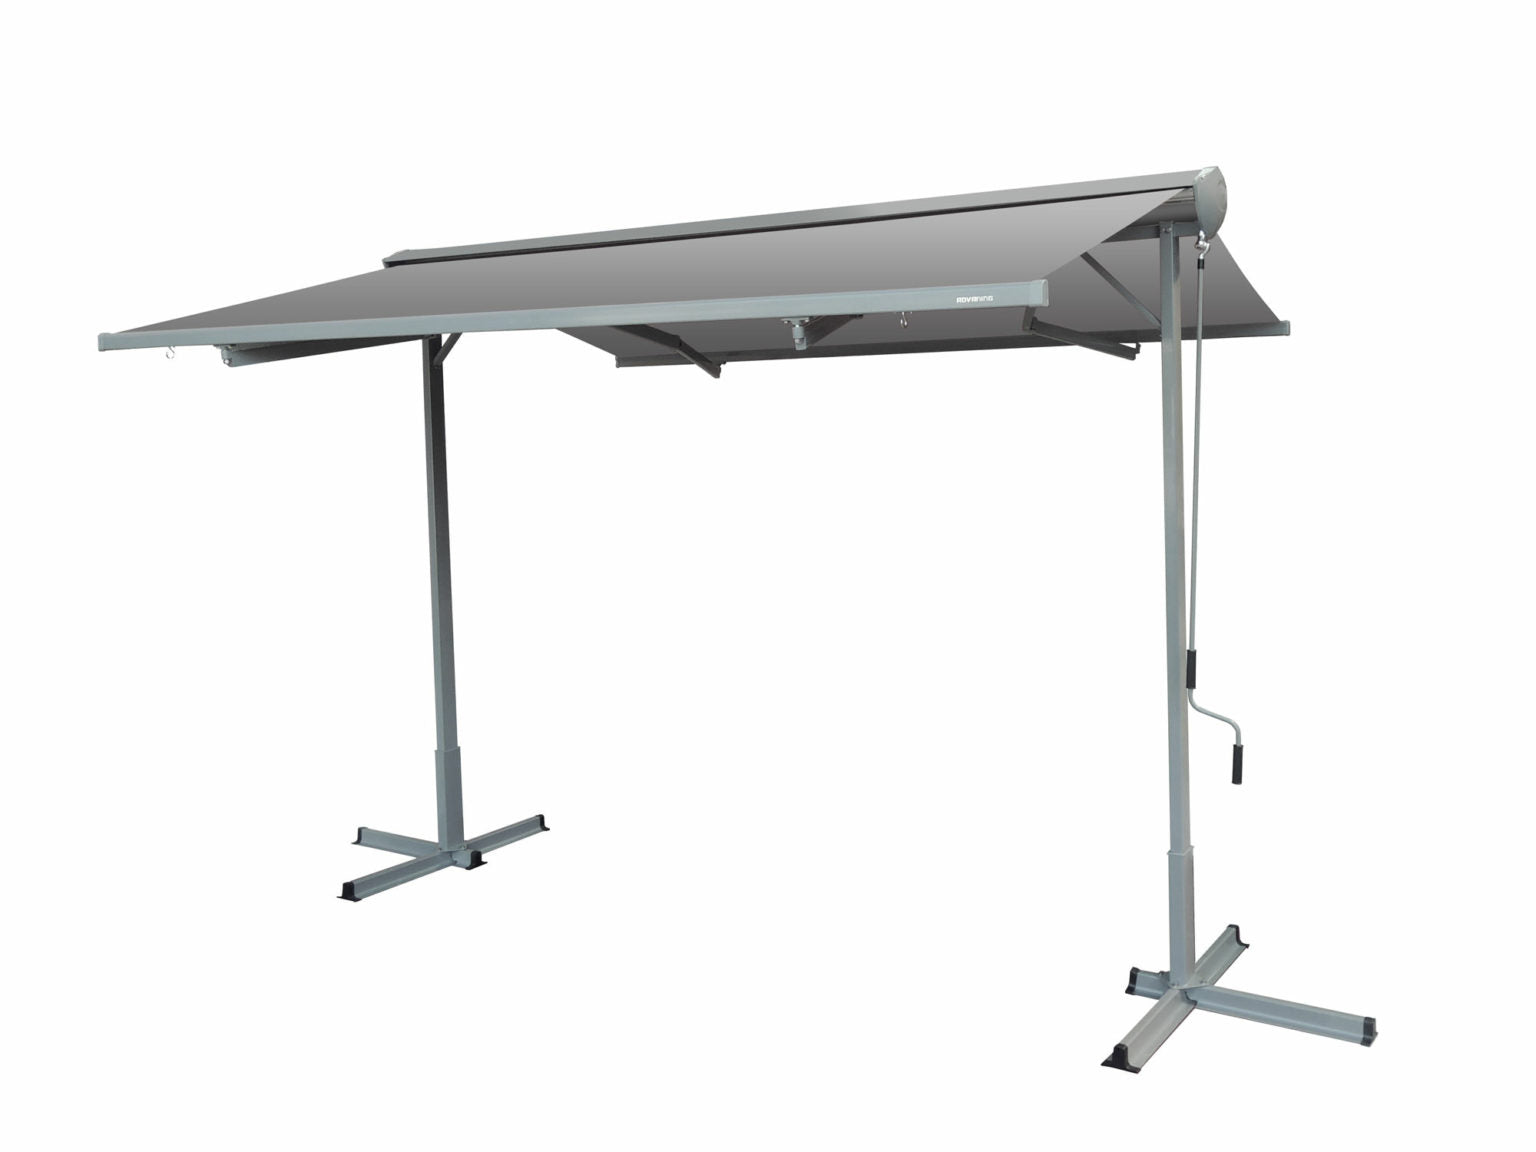 Advaning FS Series (Free Standing Awning)